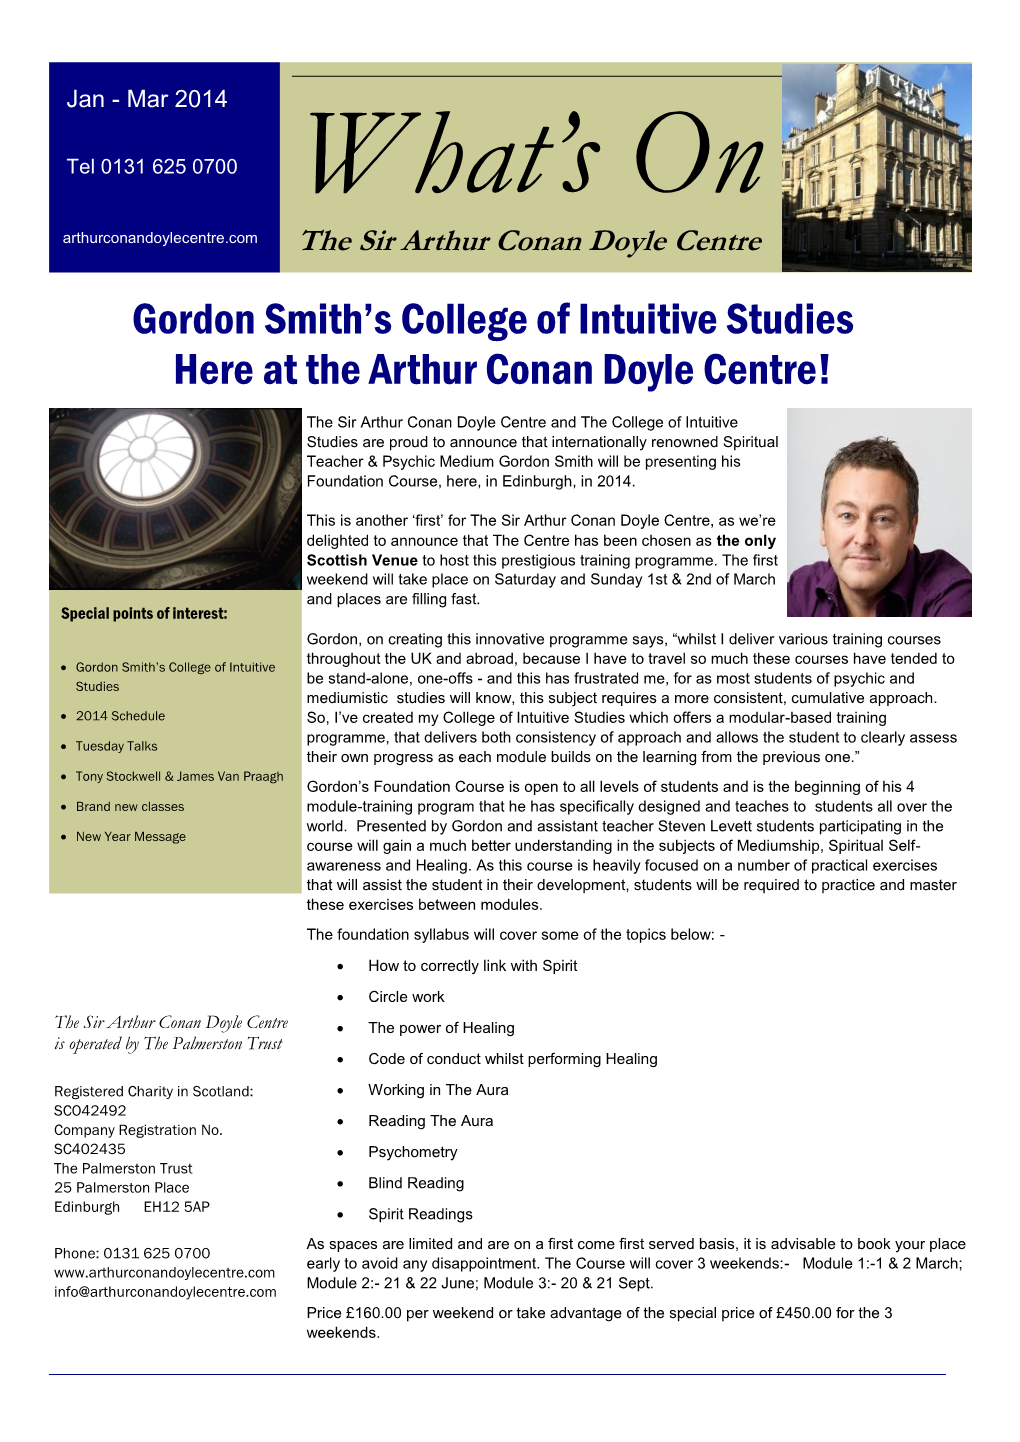 Gordon Smith's College of Intuitive Studies Here at the Arthur Conan